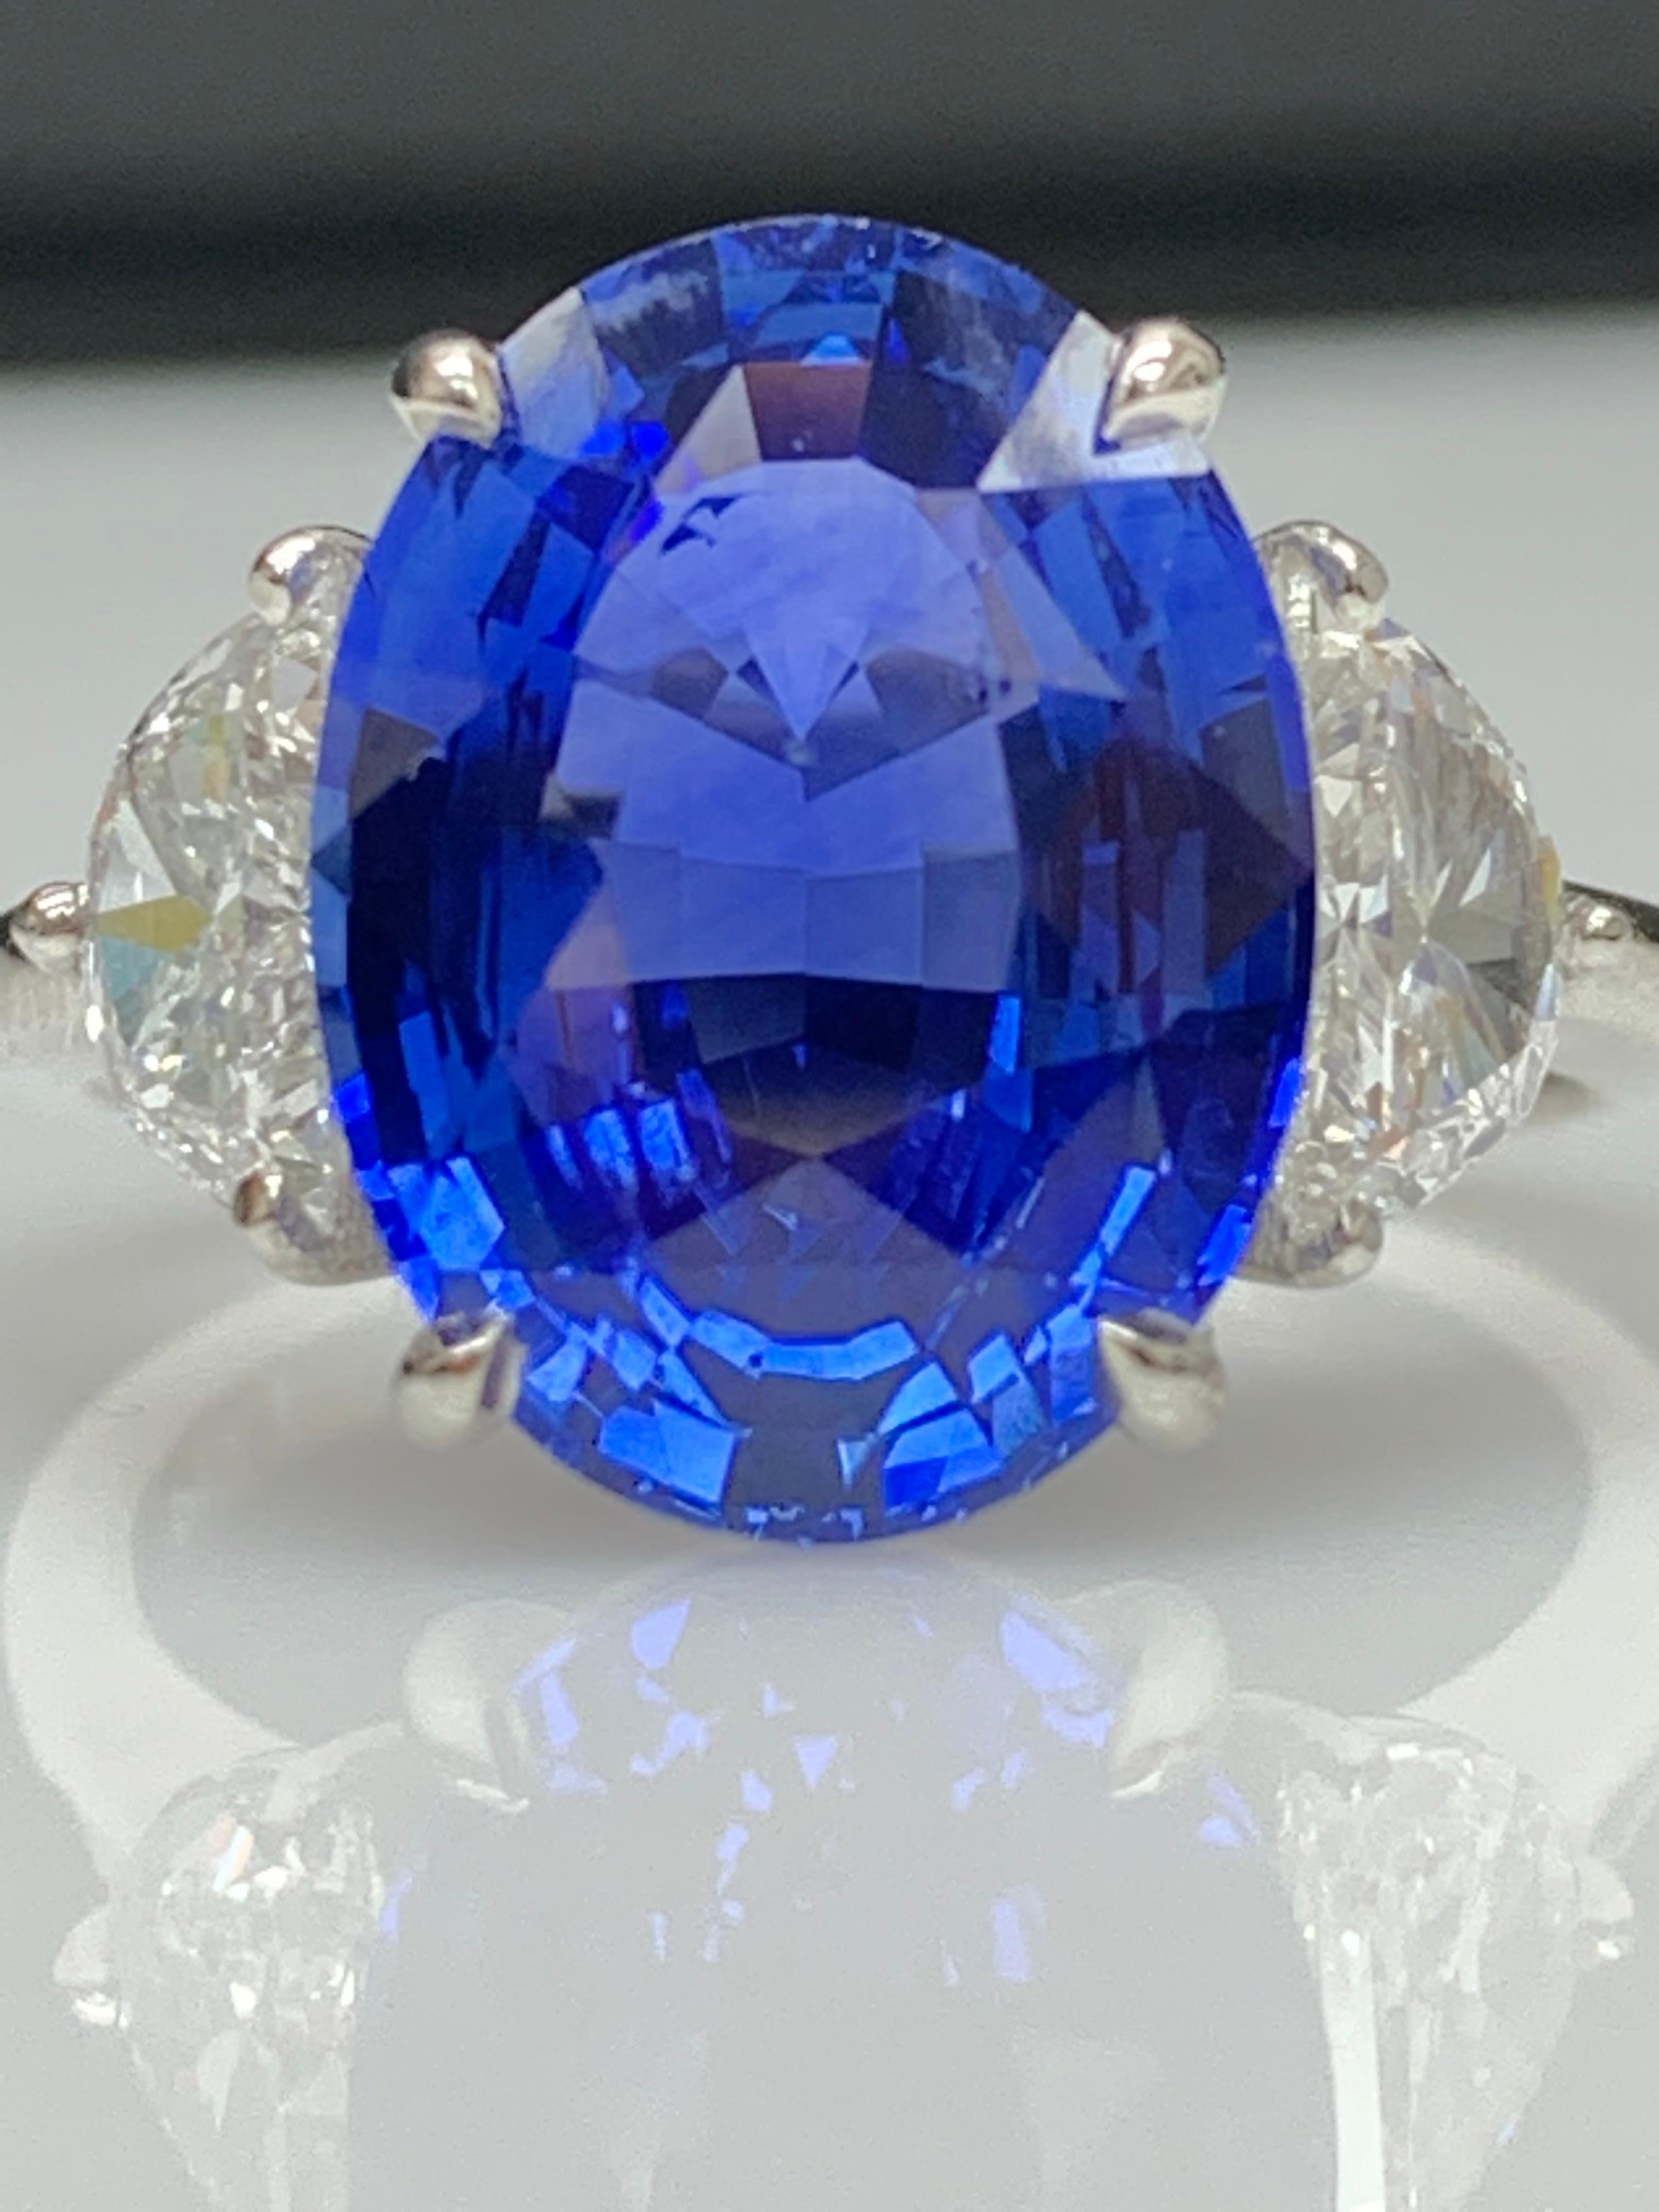 Showcases a Oval cut, Vibrant color Blue Sapphire weighing 5.96 carats, flanked by two brilliant cut half moon diamonds weighing 0.79 carats total. Elegantly set in a polished platinum composition.